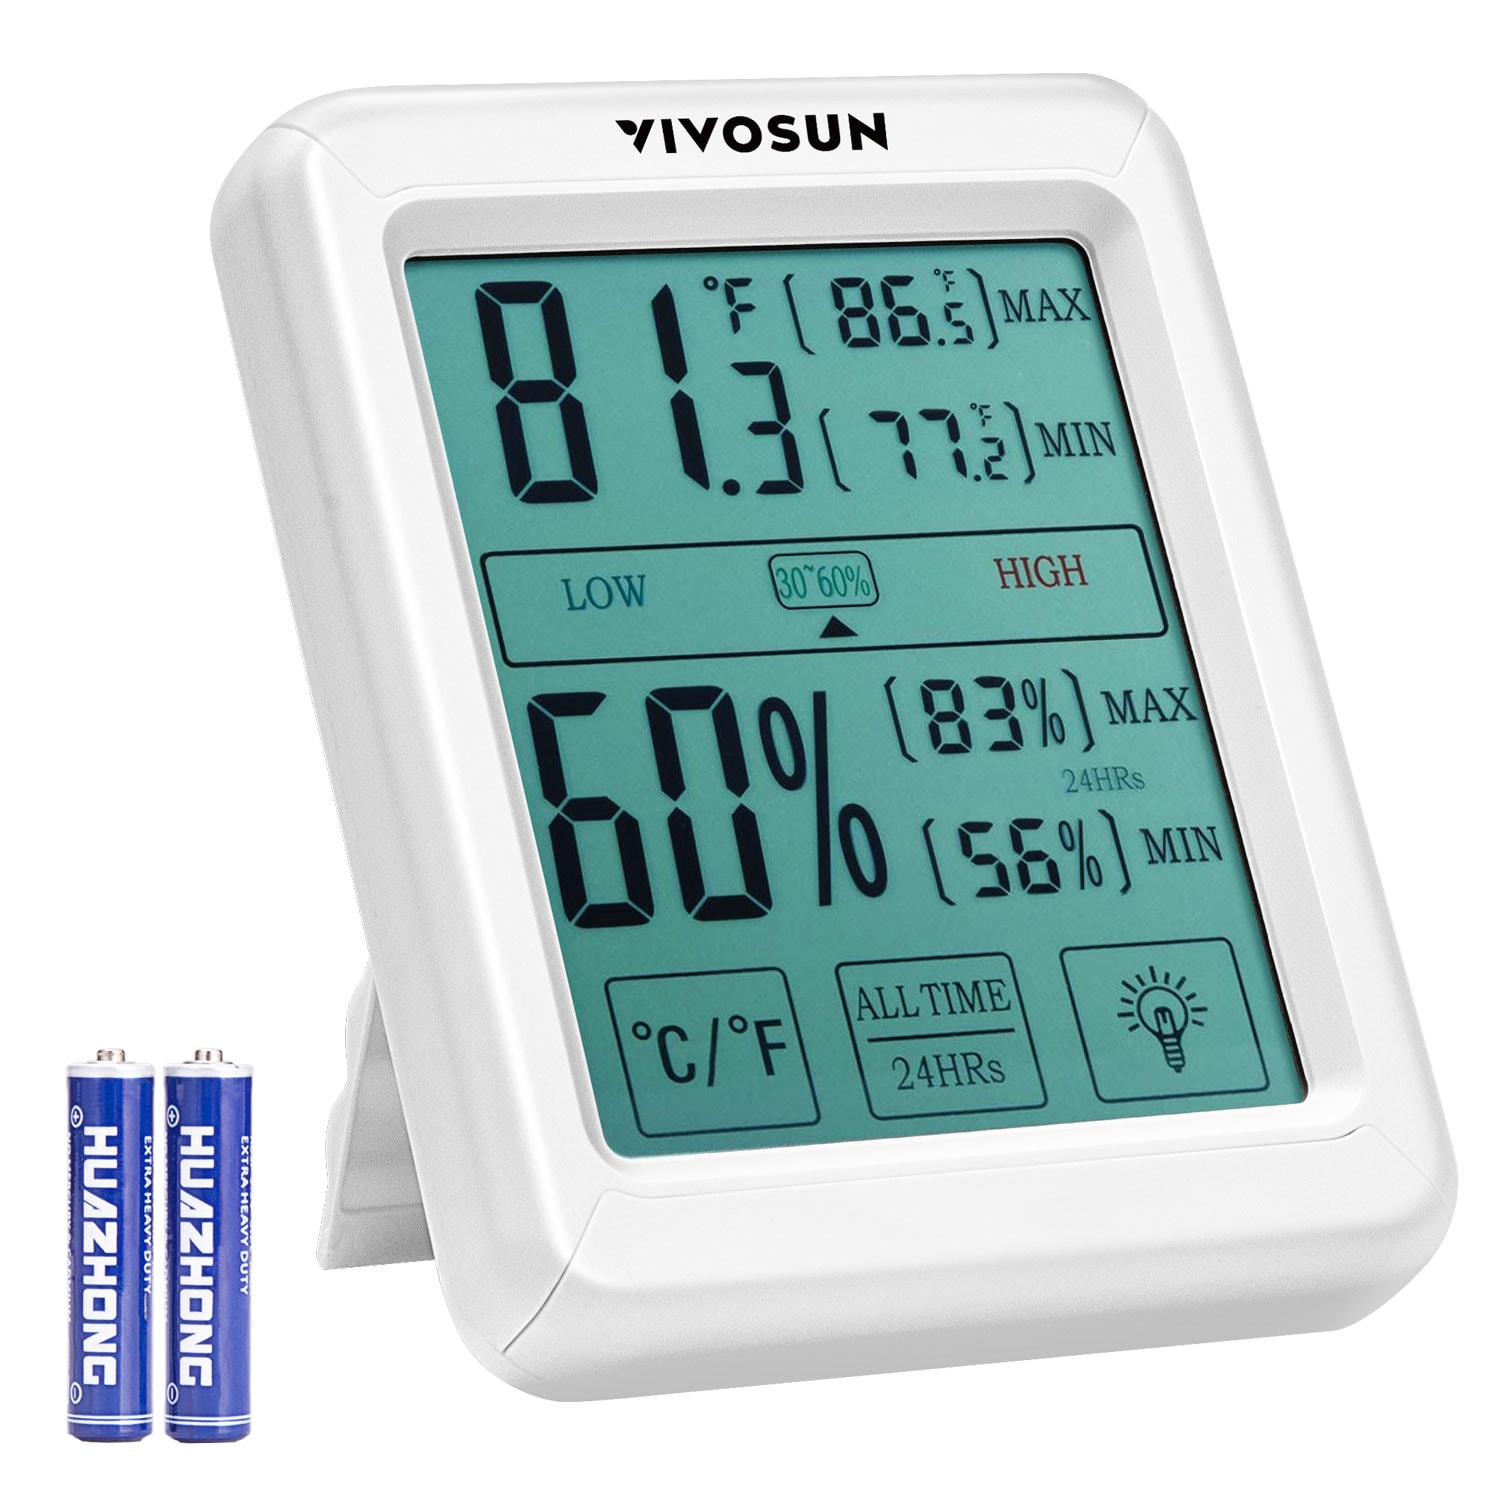 VIVOSUN Digital Indoor Hygrometer Grow Tent Thermometer, Temperature and  Humidity Monitor Meter for Plants, Indoor, Home, Office, 2 Pack